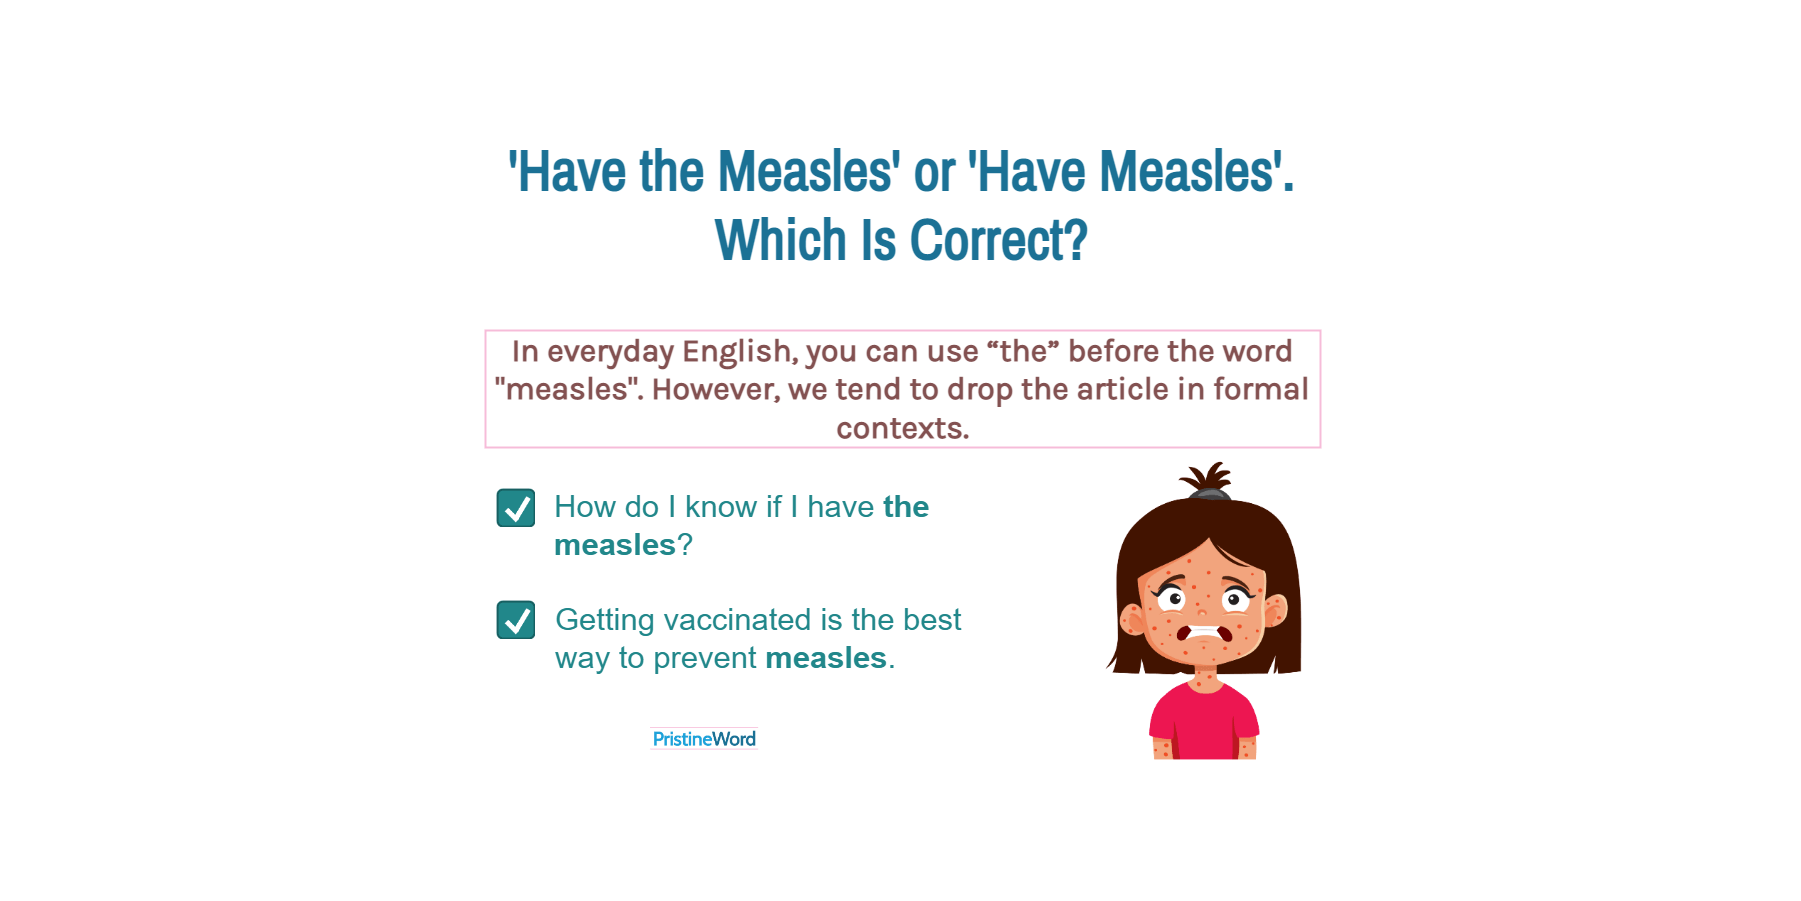 The Measles or Measles. Which Is Correct?